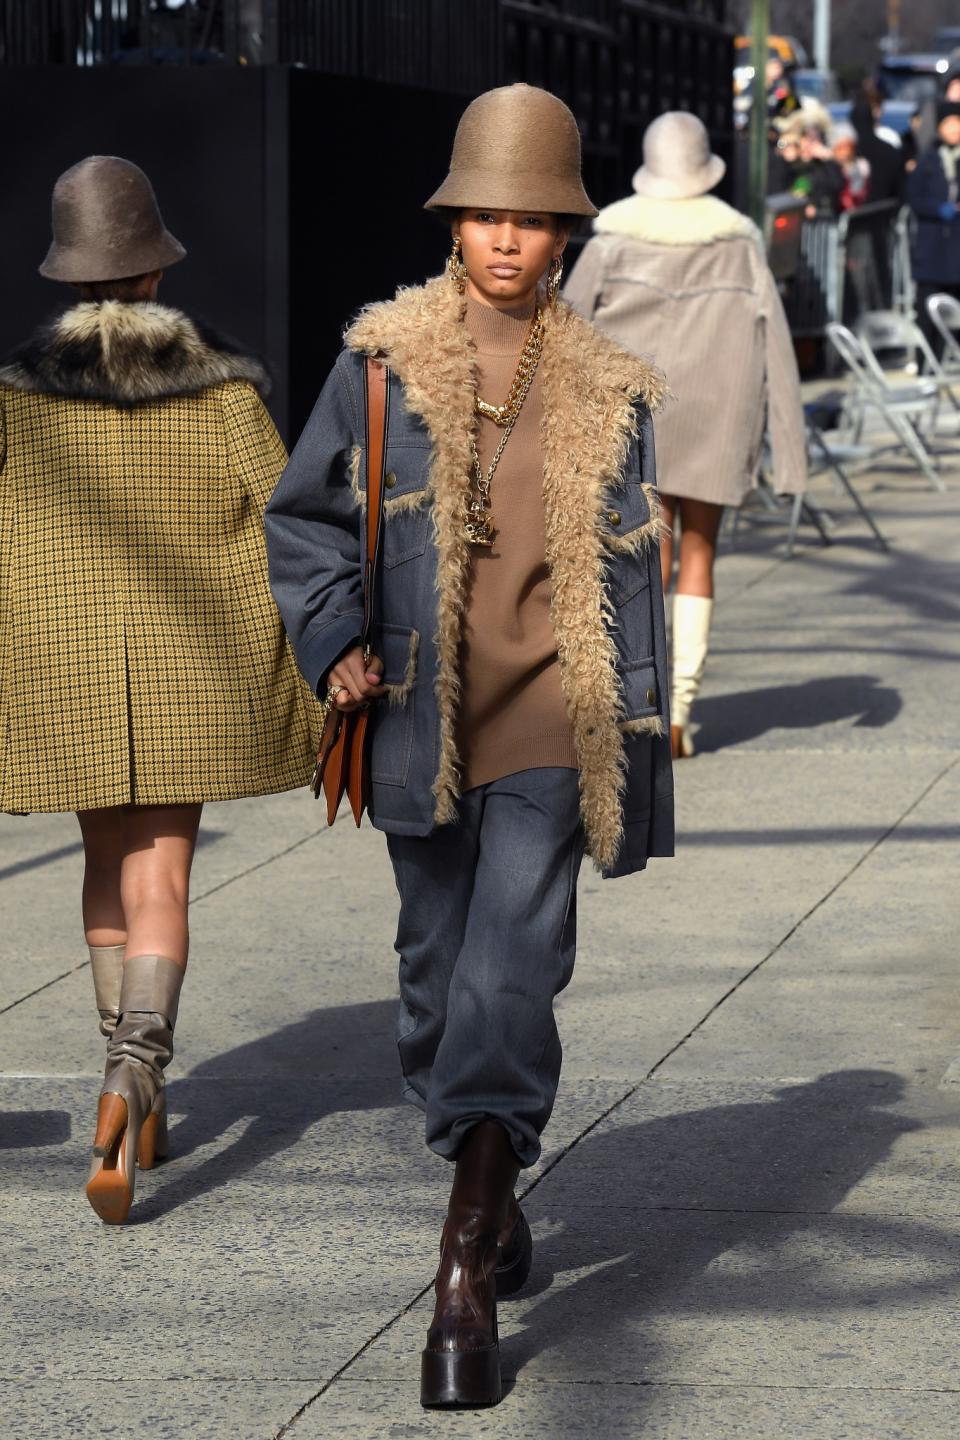 Model Lineisy Montero wears a denim shearling-lined jacket, baggy trousers, gold chunky jewelry, and platform boots for the ultimate hip-hop look